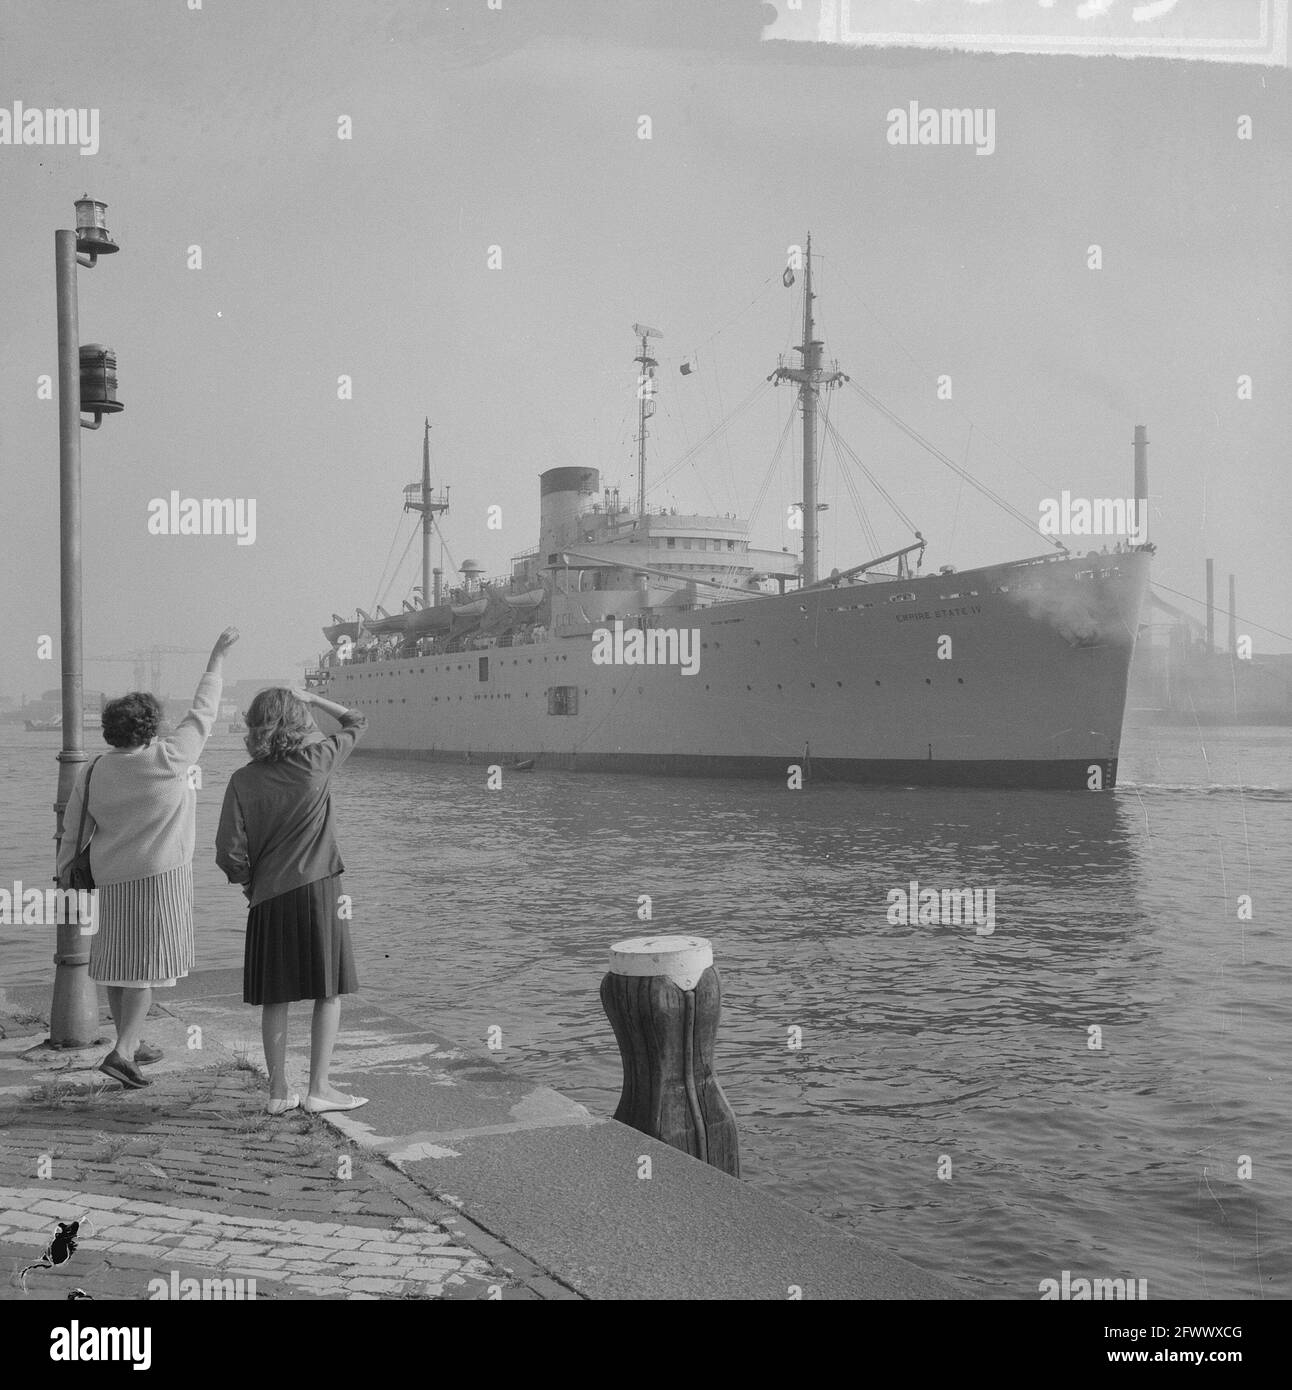 Empire State 4 American merchant marine training ship moored at Stenen Hoofd in Amsterdam, July 17, 1964, training ships, The Netherlands, 20th century press agency photo, news to remember, documentary, historic photography 1945-1990, visual stories, human history of the Twentieth Century, capturing moments in time Stock Photo